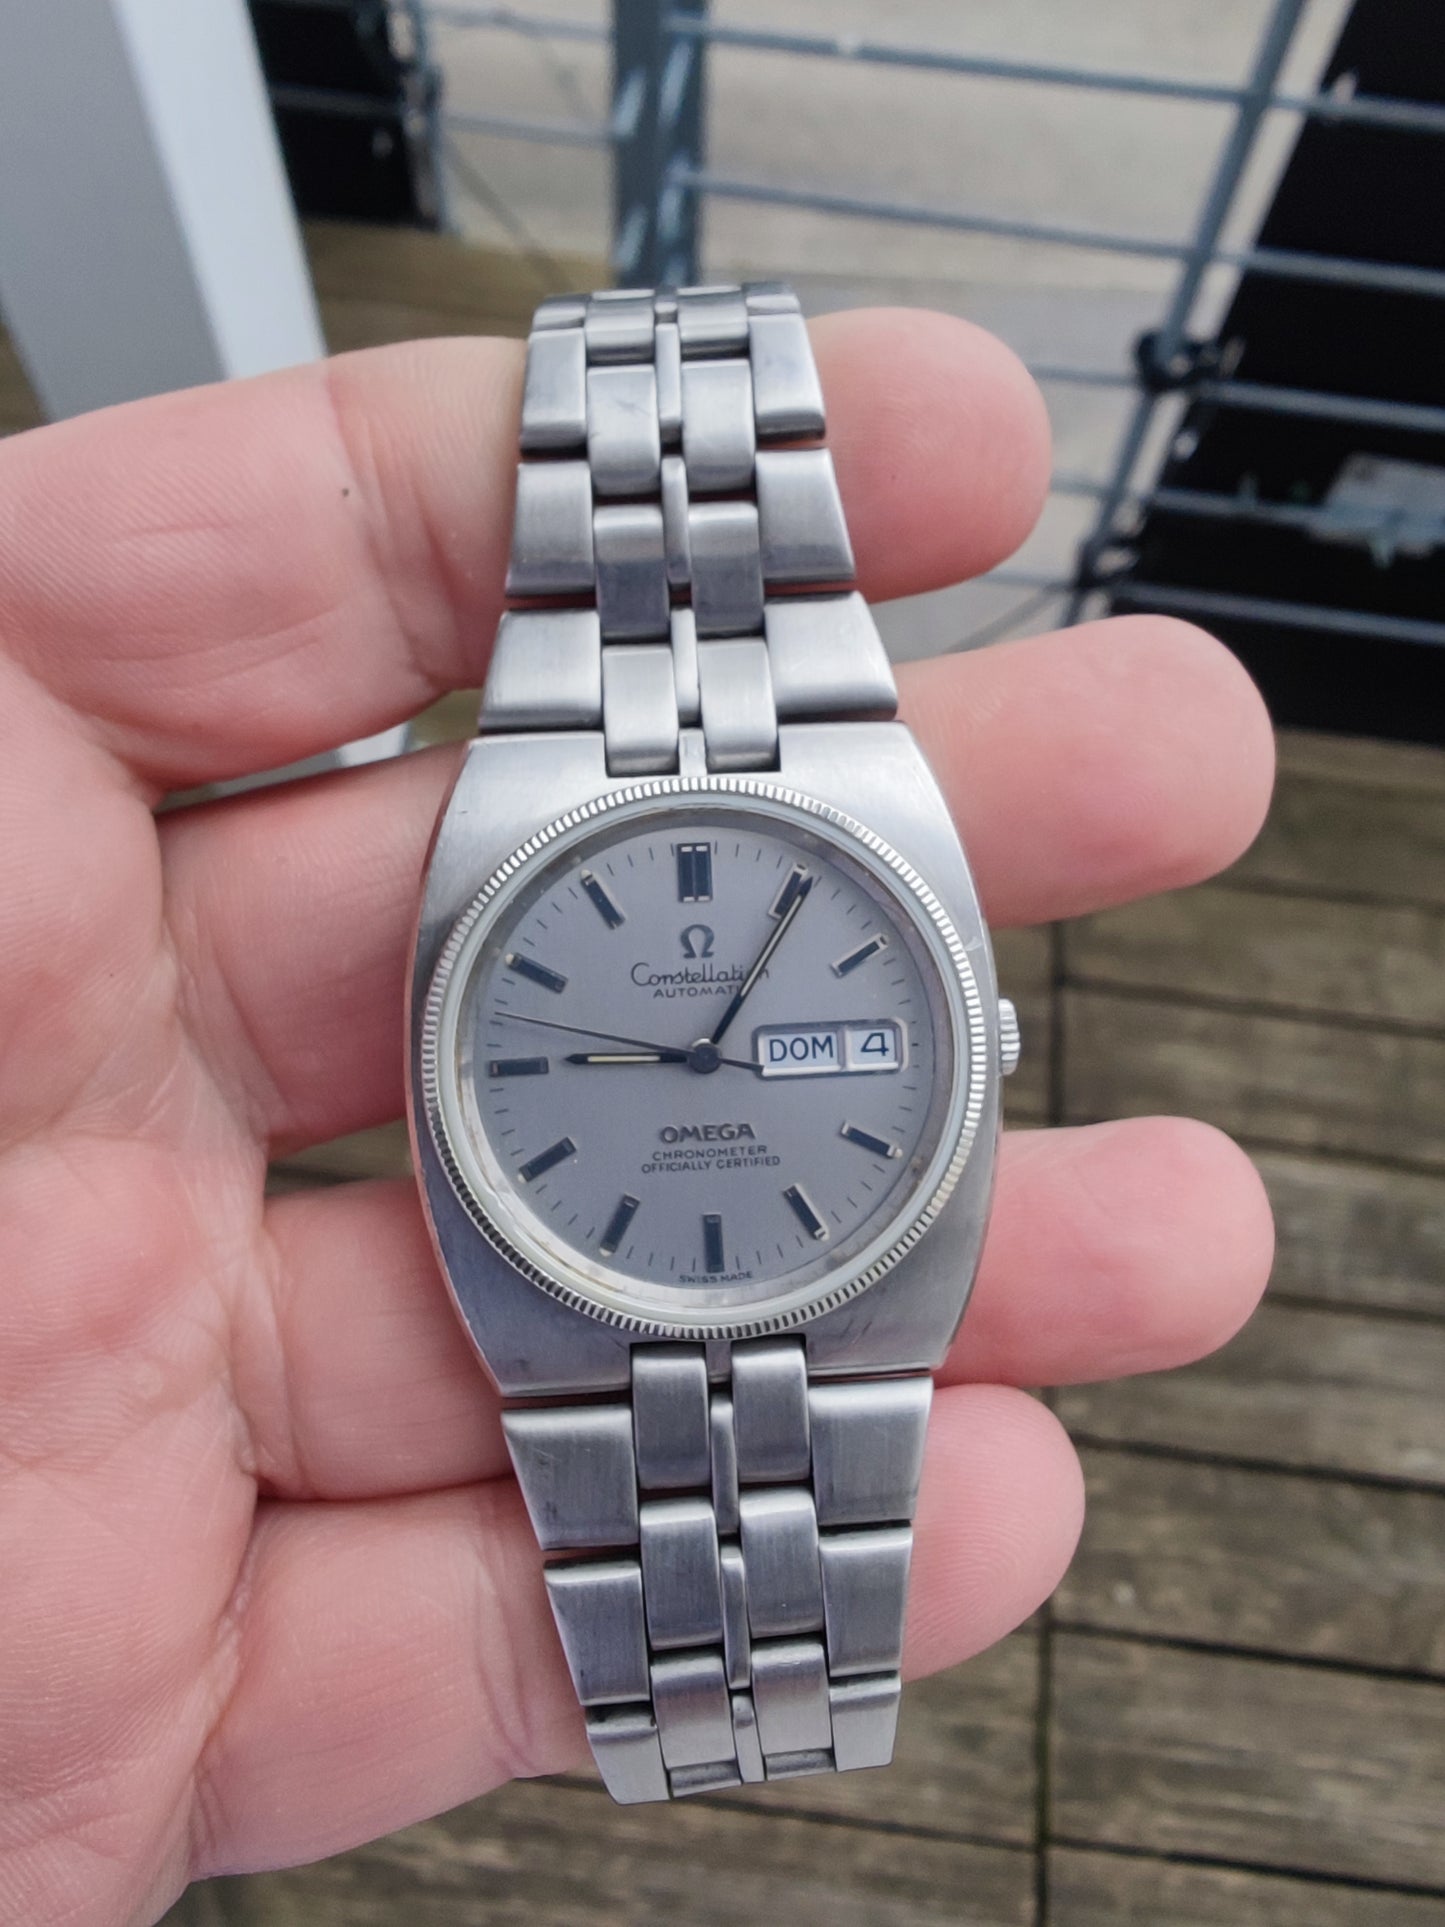 Omega Constellation Automatic Ref 168.054 cal. 1021